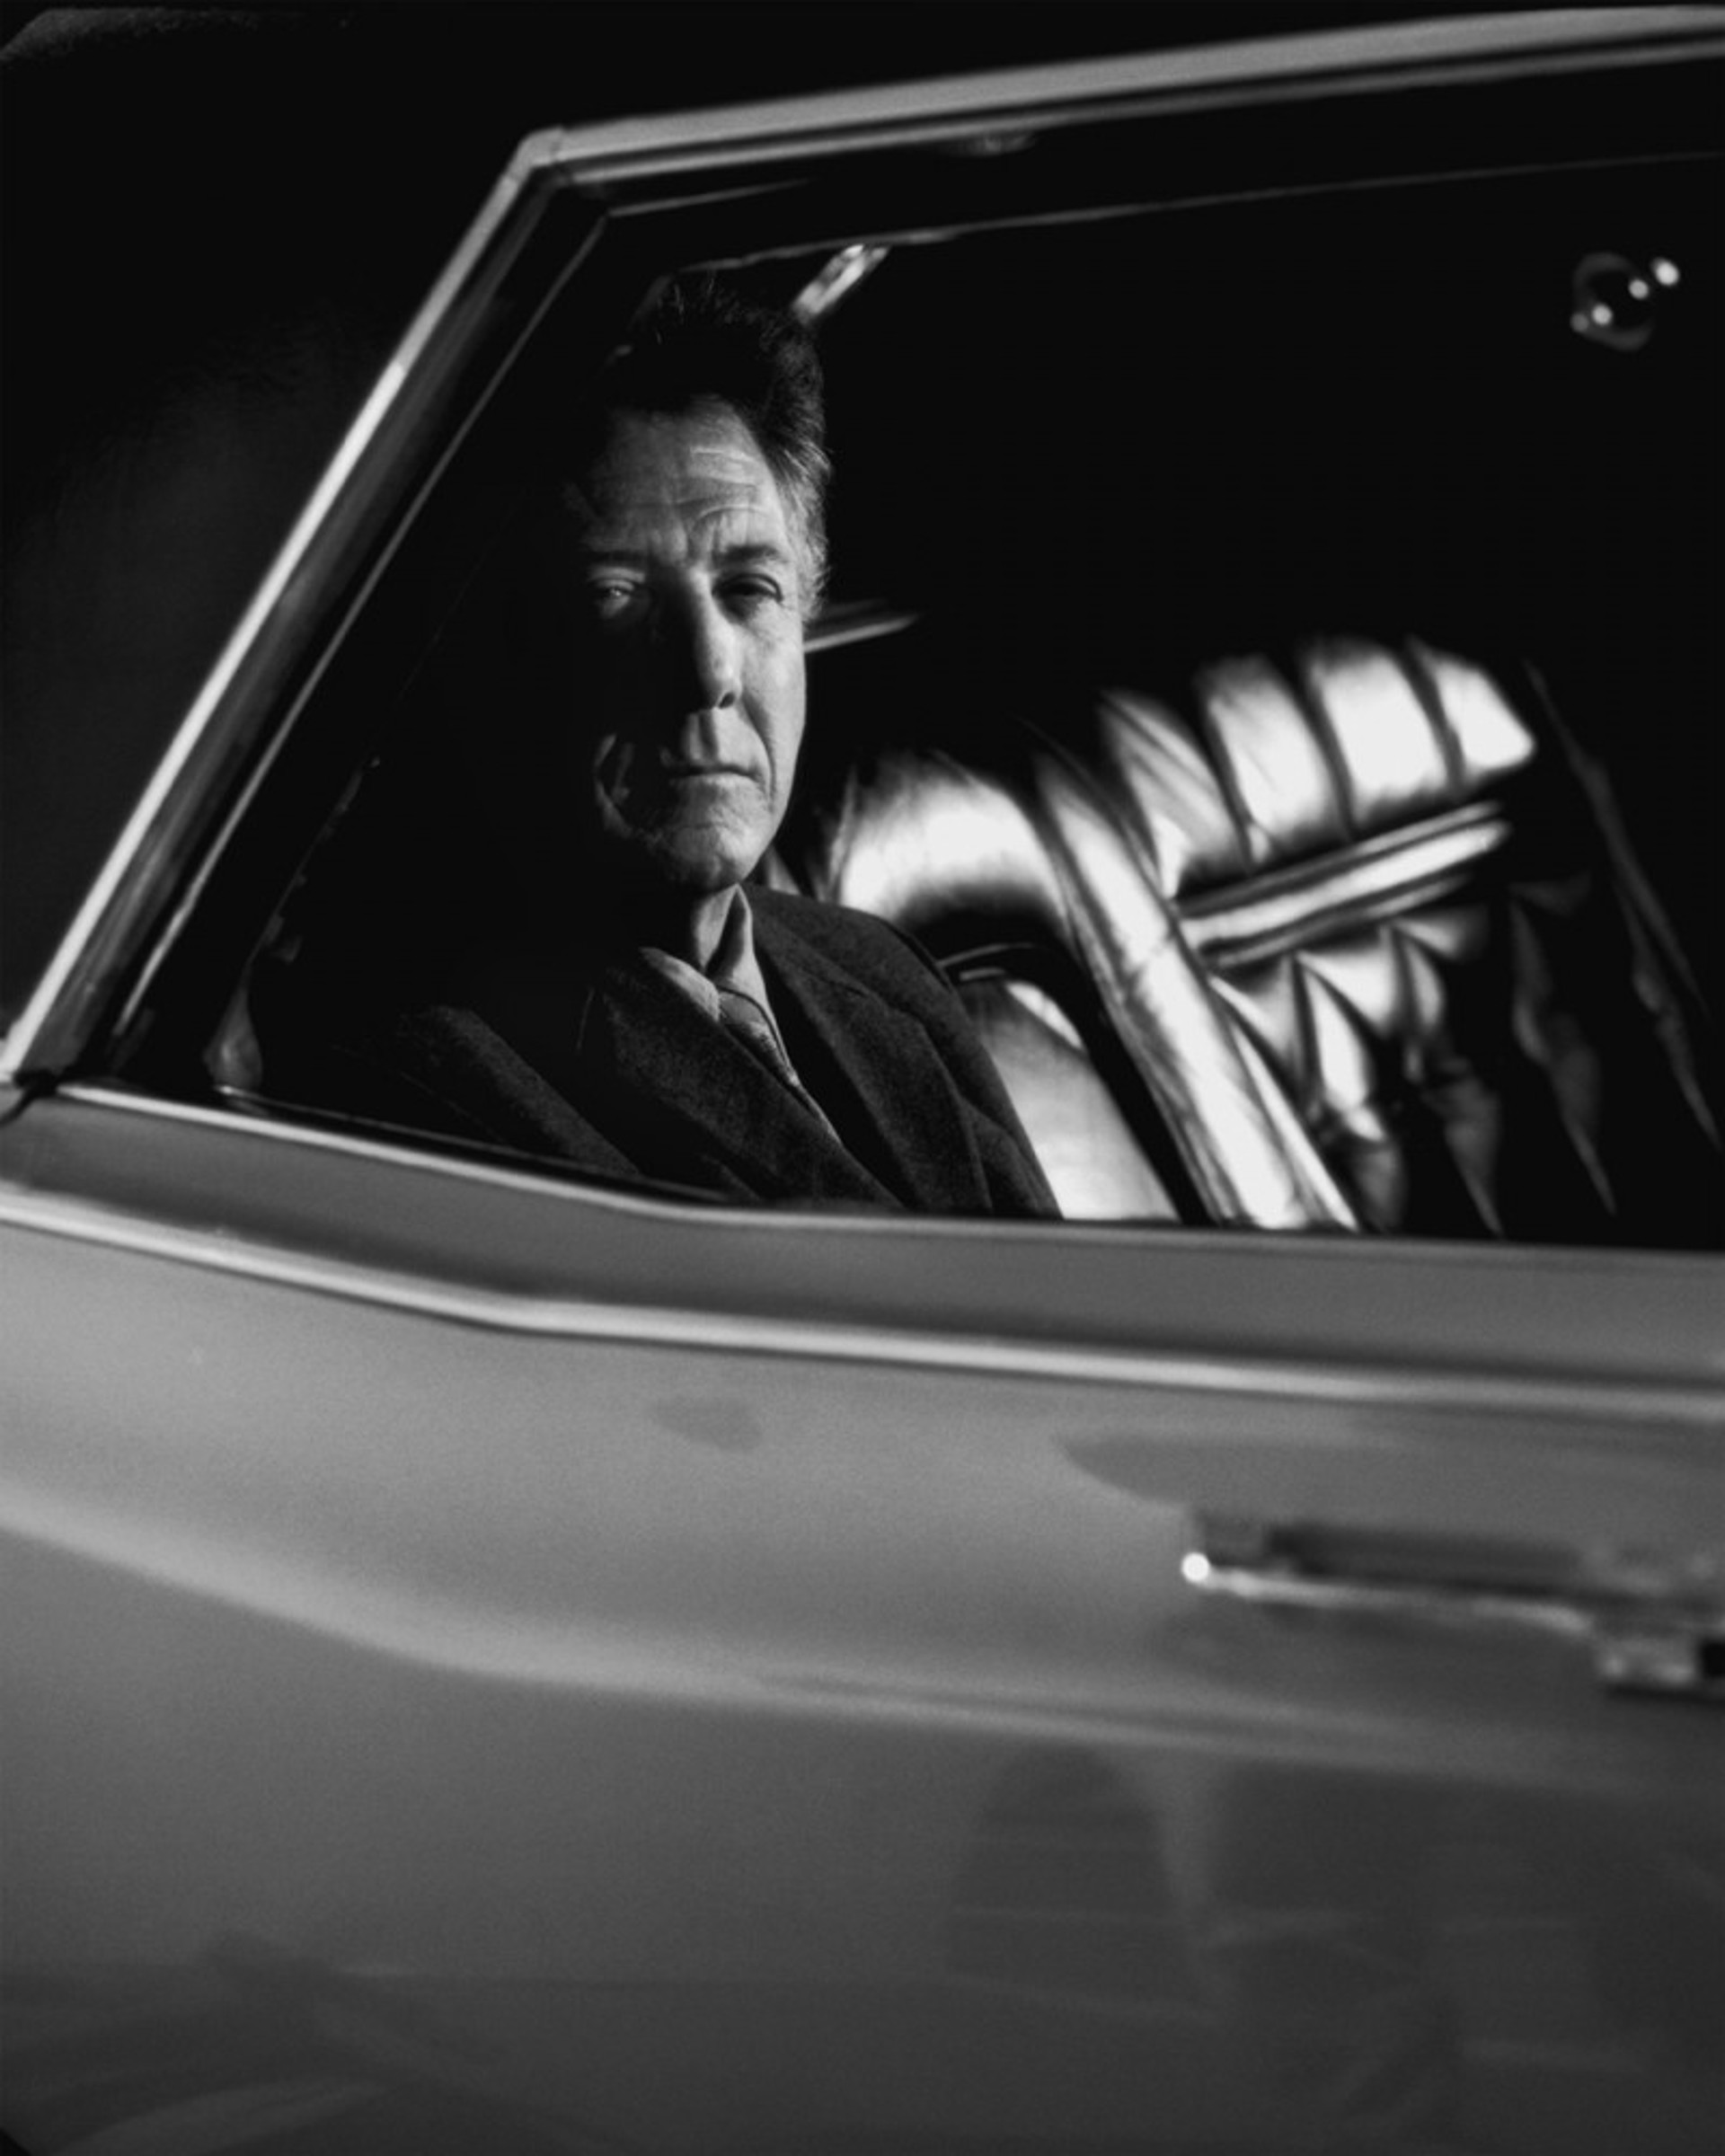 01028 Dustin Hoffman in Car BW by Timothy White